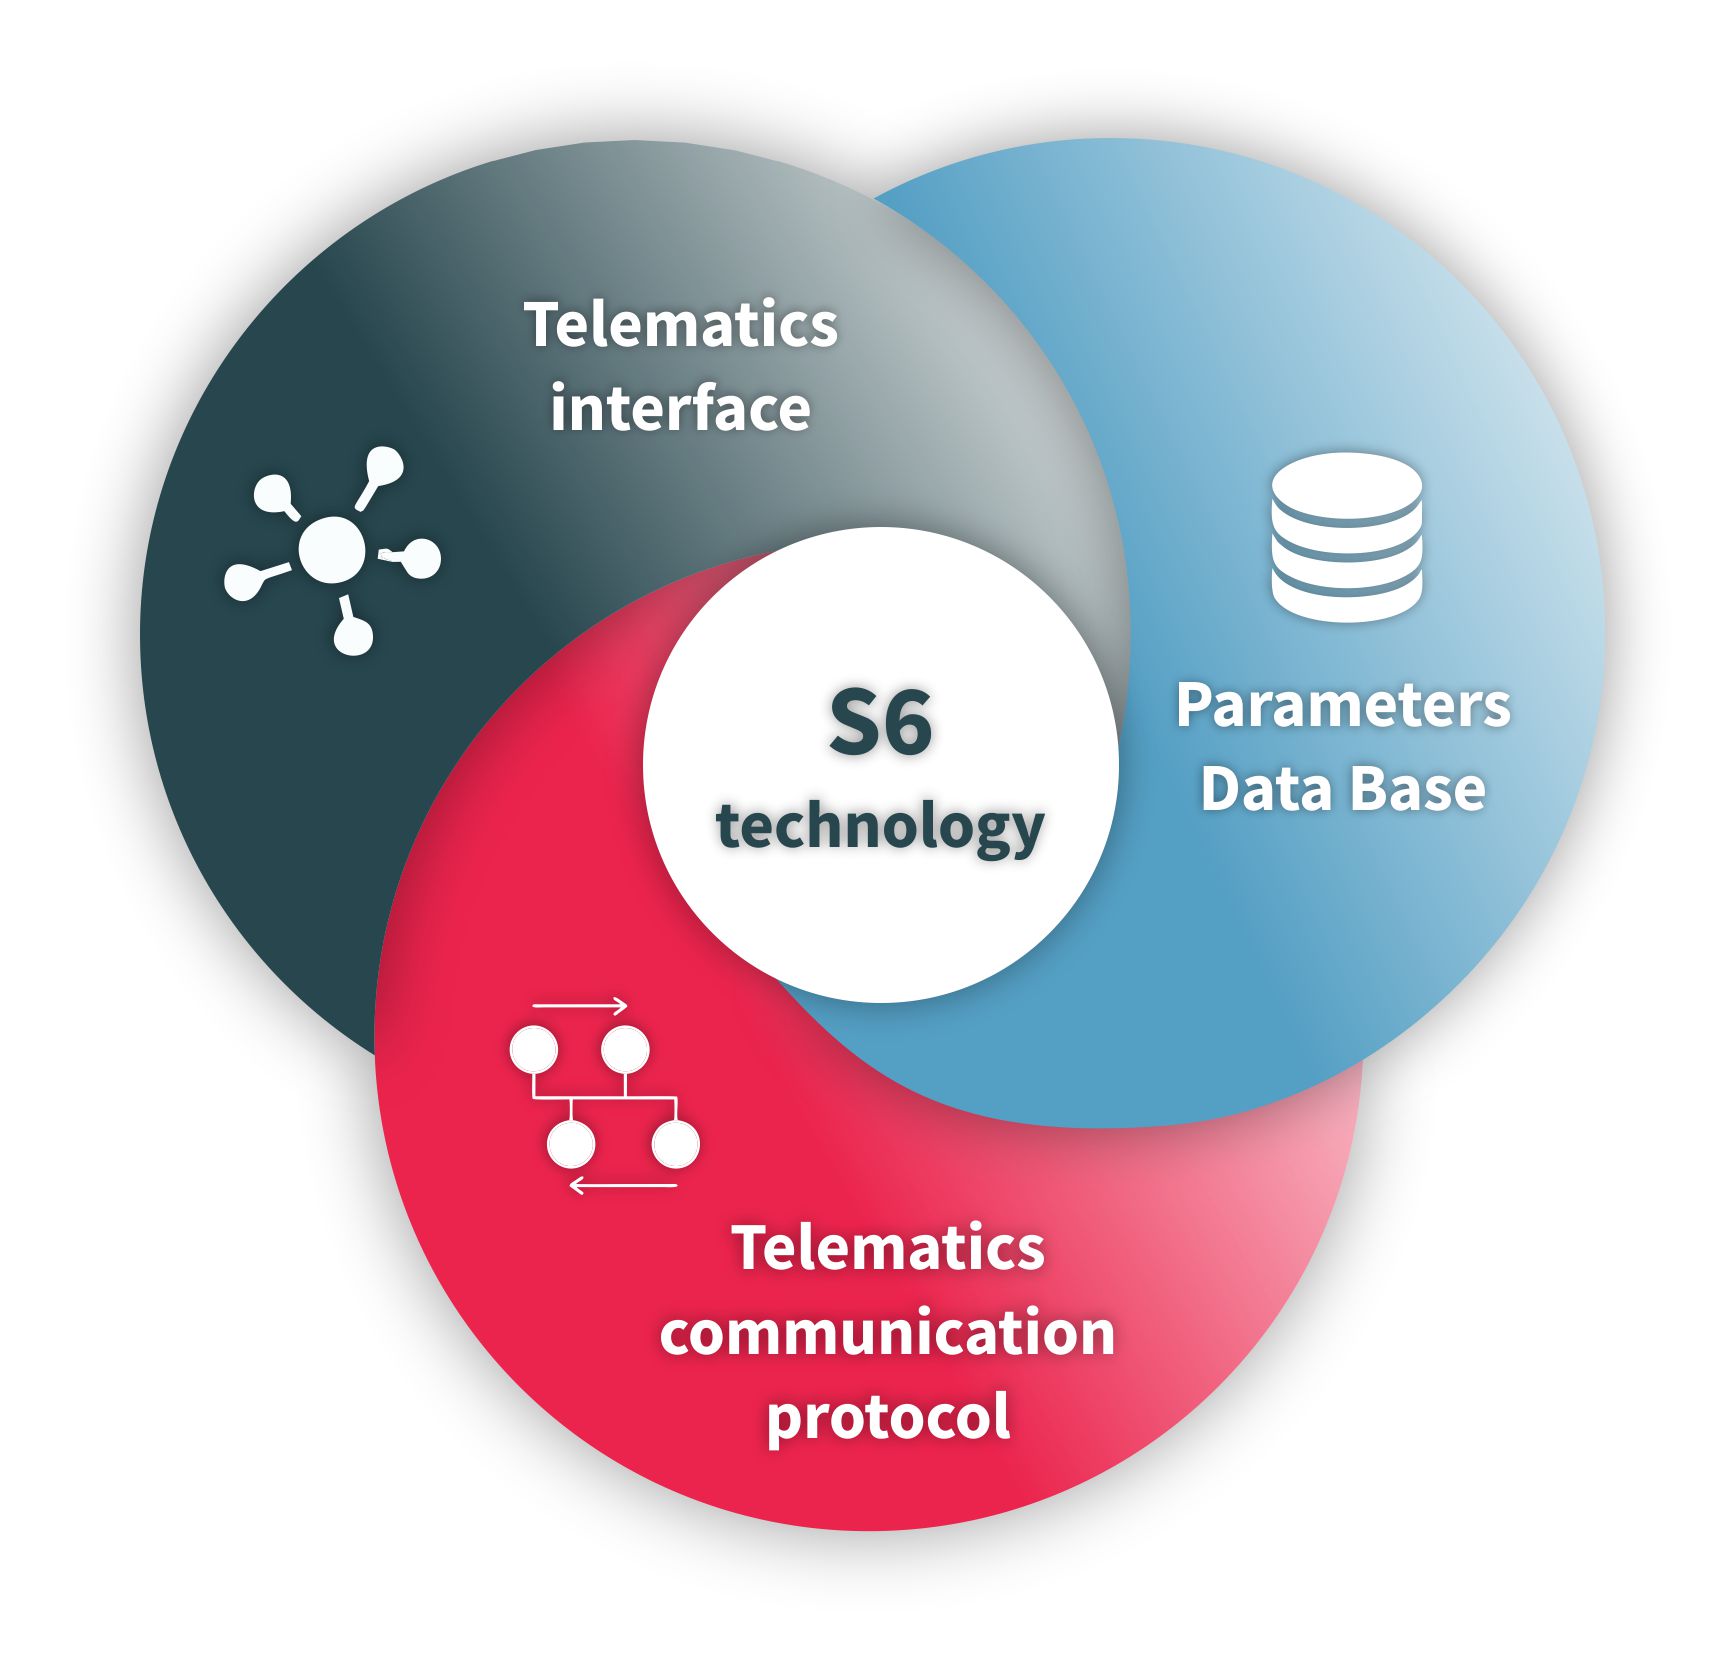 Elements of S6 technology